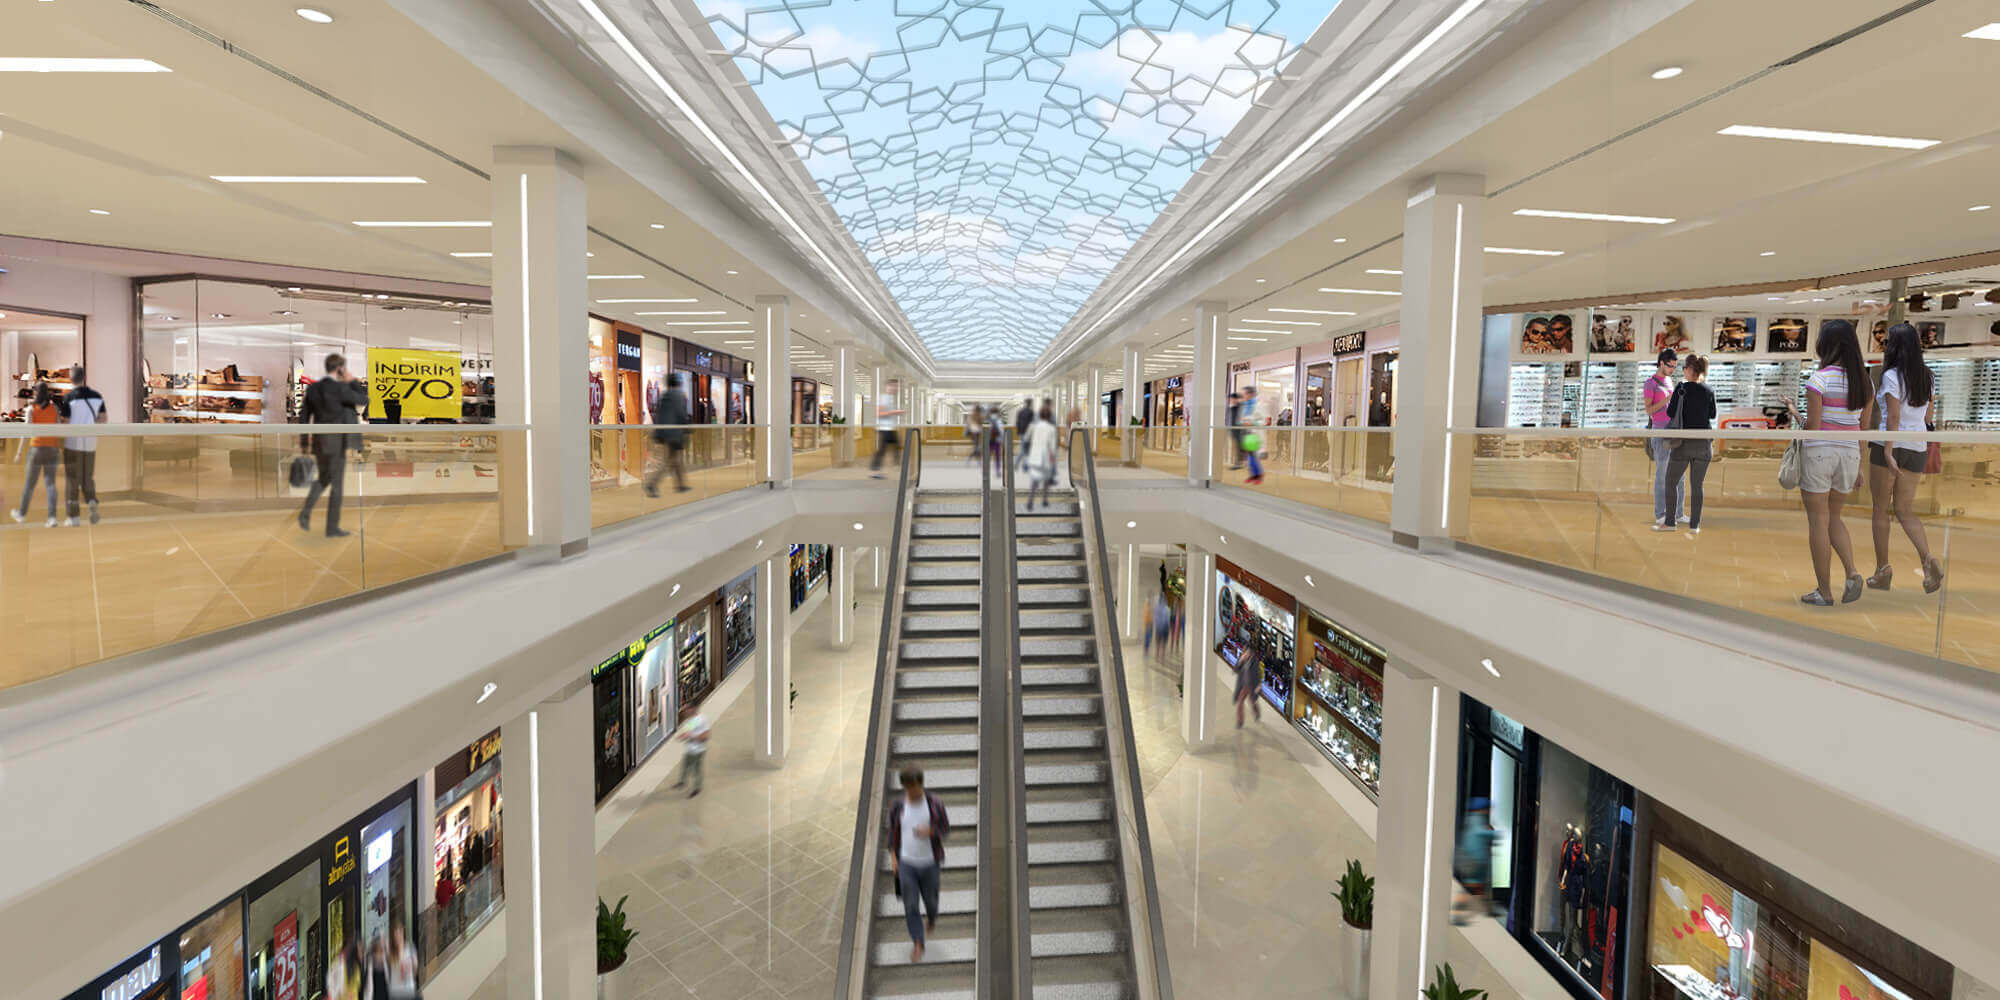 Icerenkoy shopping mall Istanbul interior design escalator circulation and geodesic glazed roof design